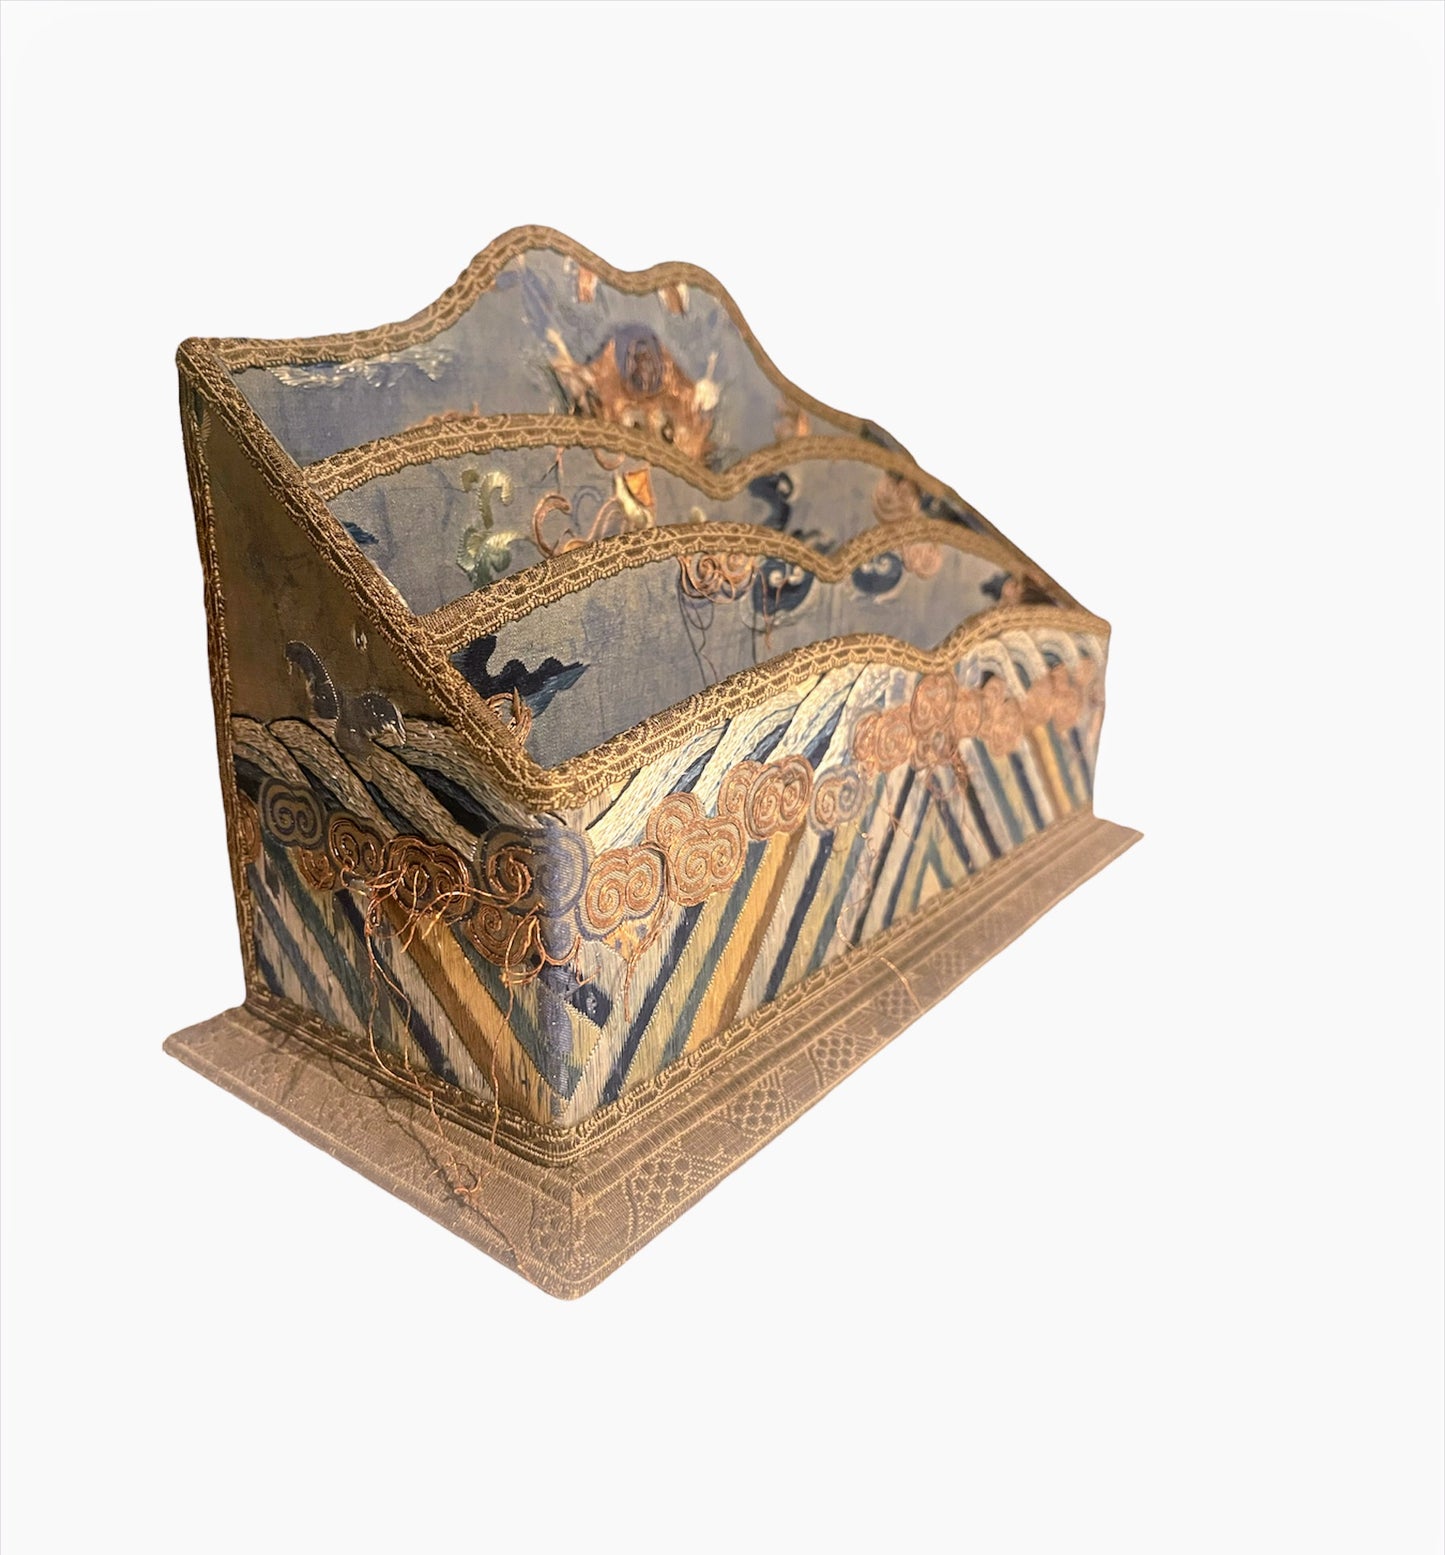 An antique Chinese letter holder